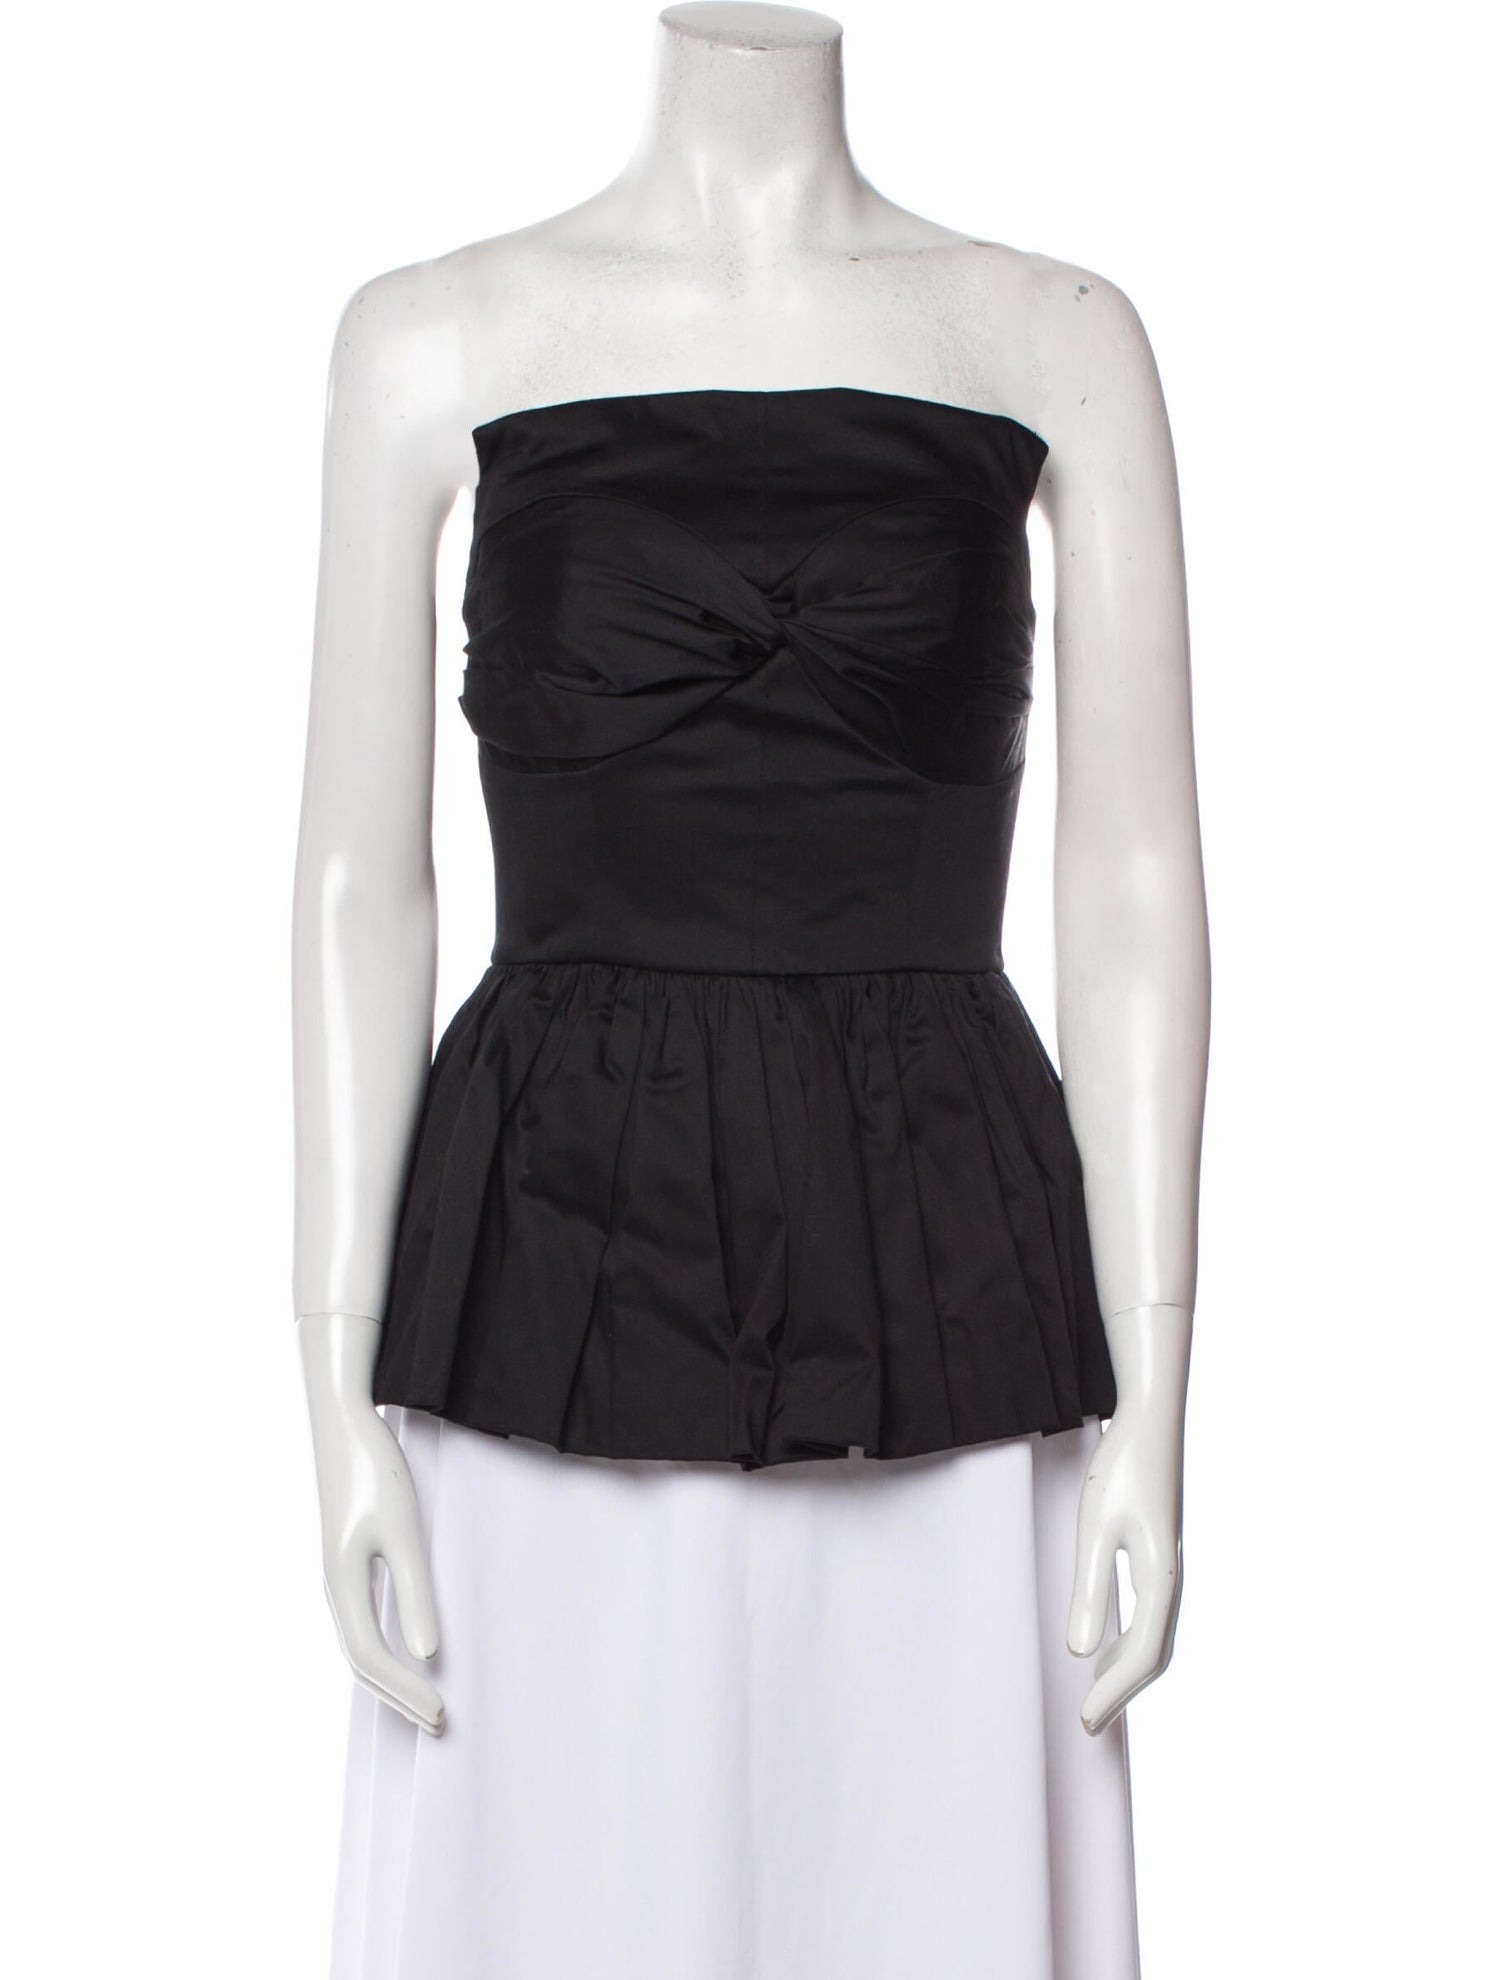 Tove, Strapless Top w/ Tags Size: S, US4, FR36